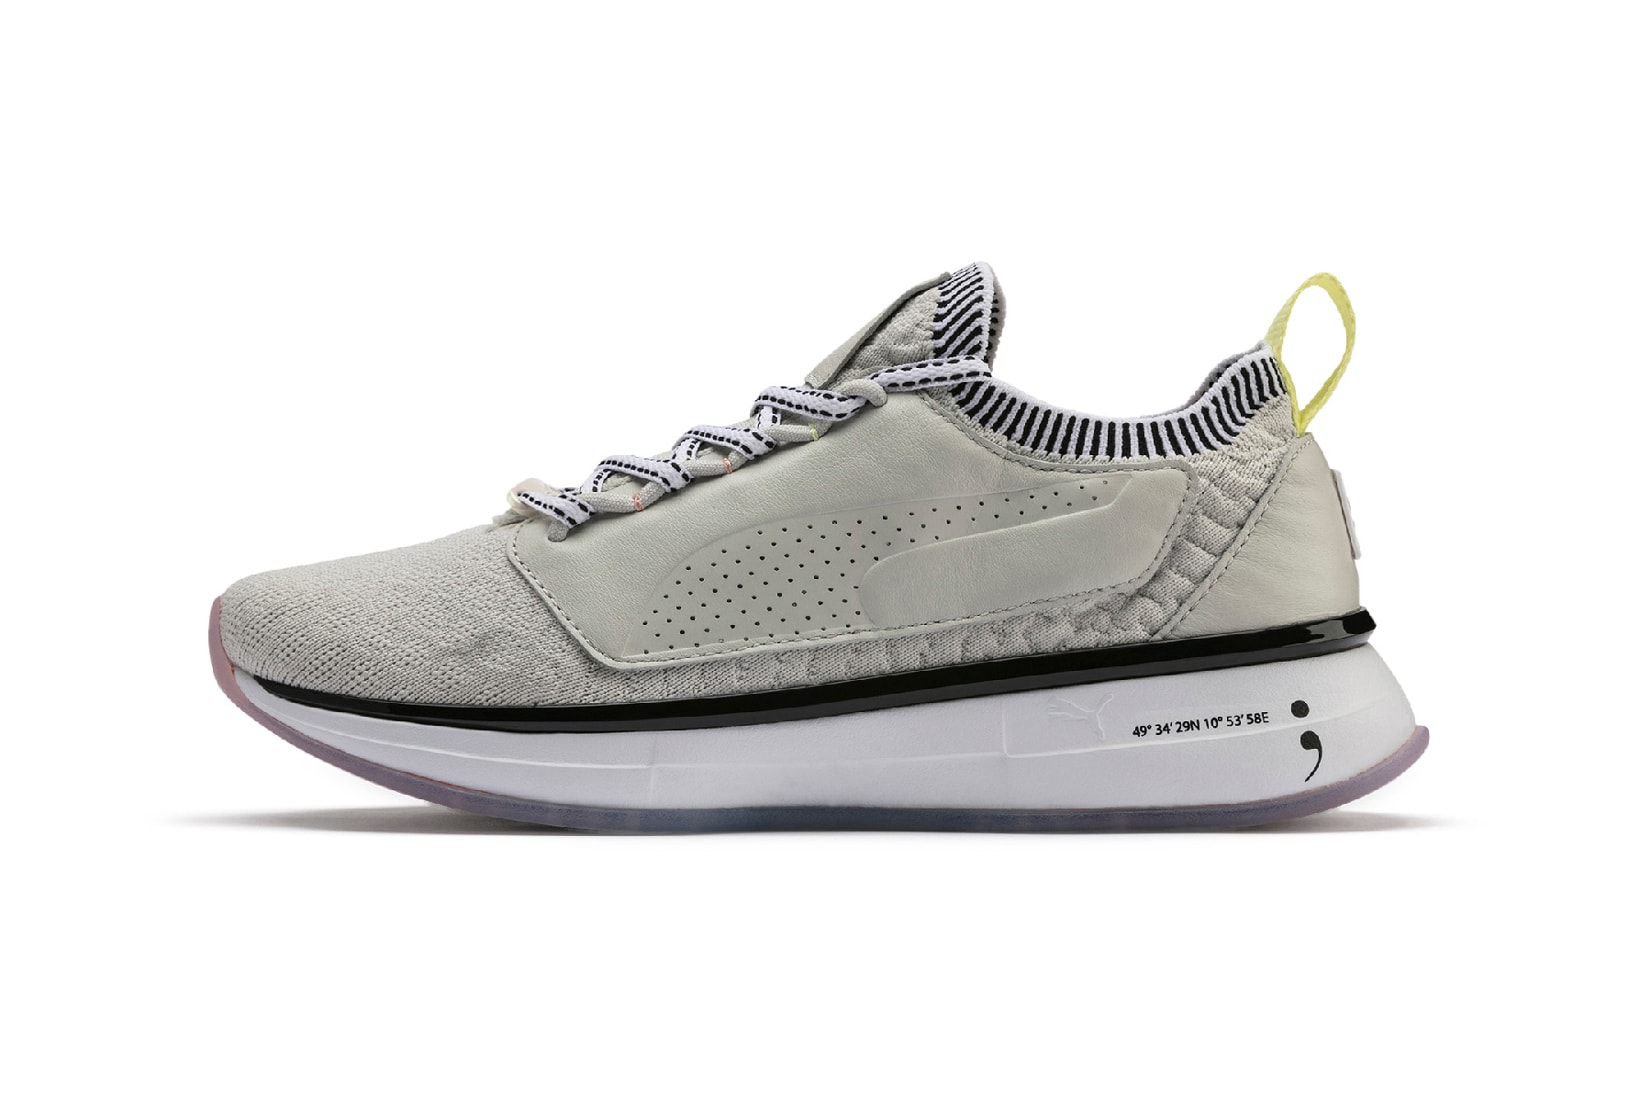 Selena Gomez x PUMA Spring Summer 2019 Collection SG Runner Strength Training Shoes Glacier Grey White